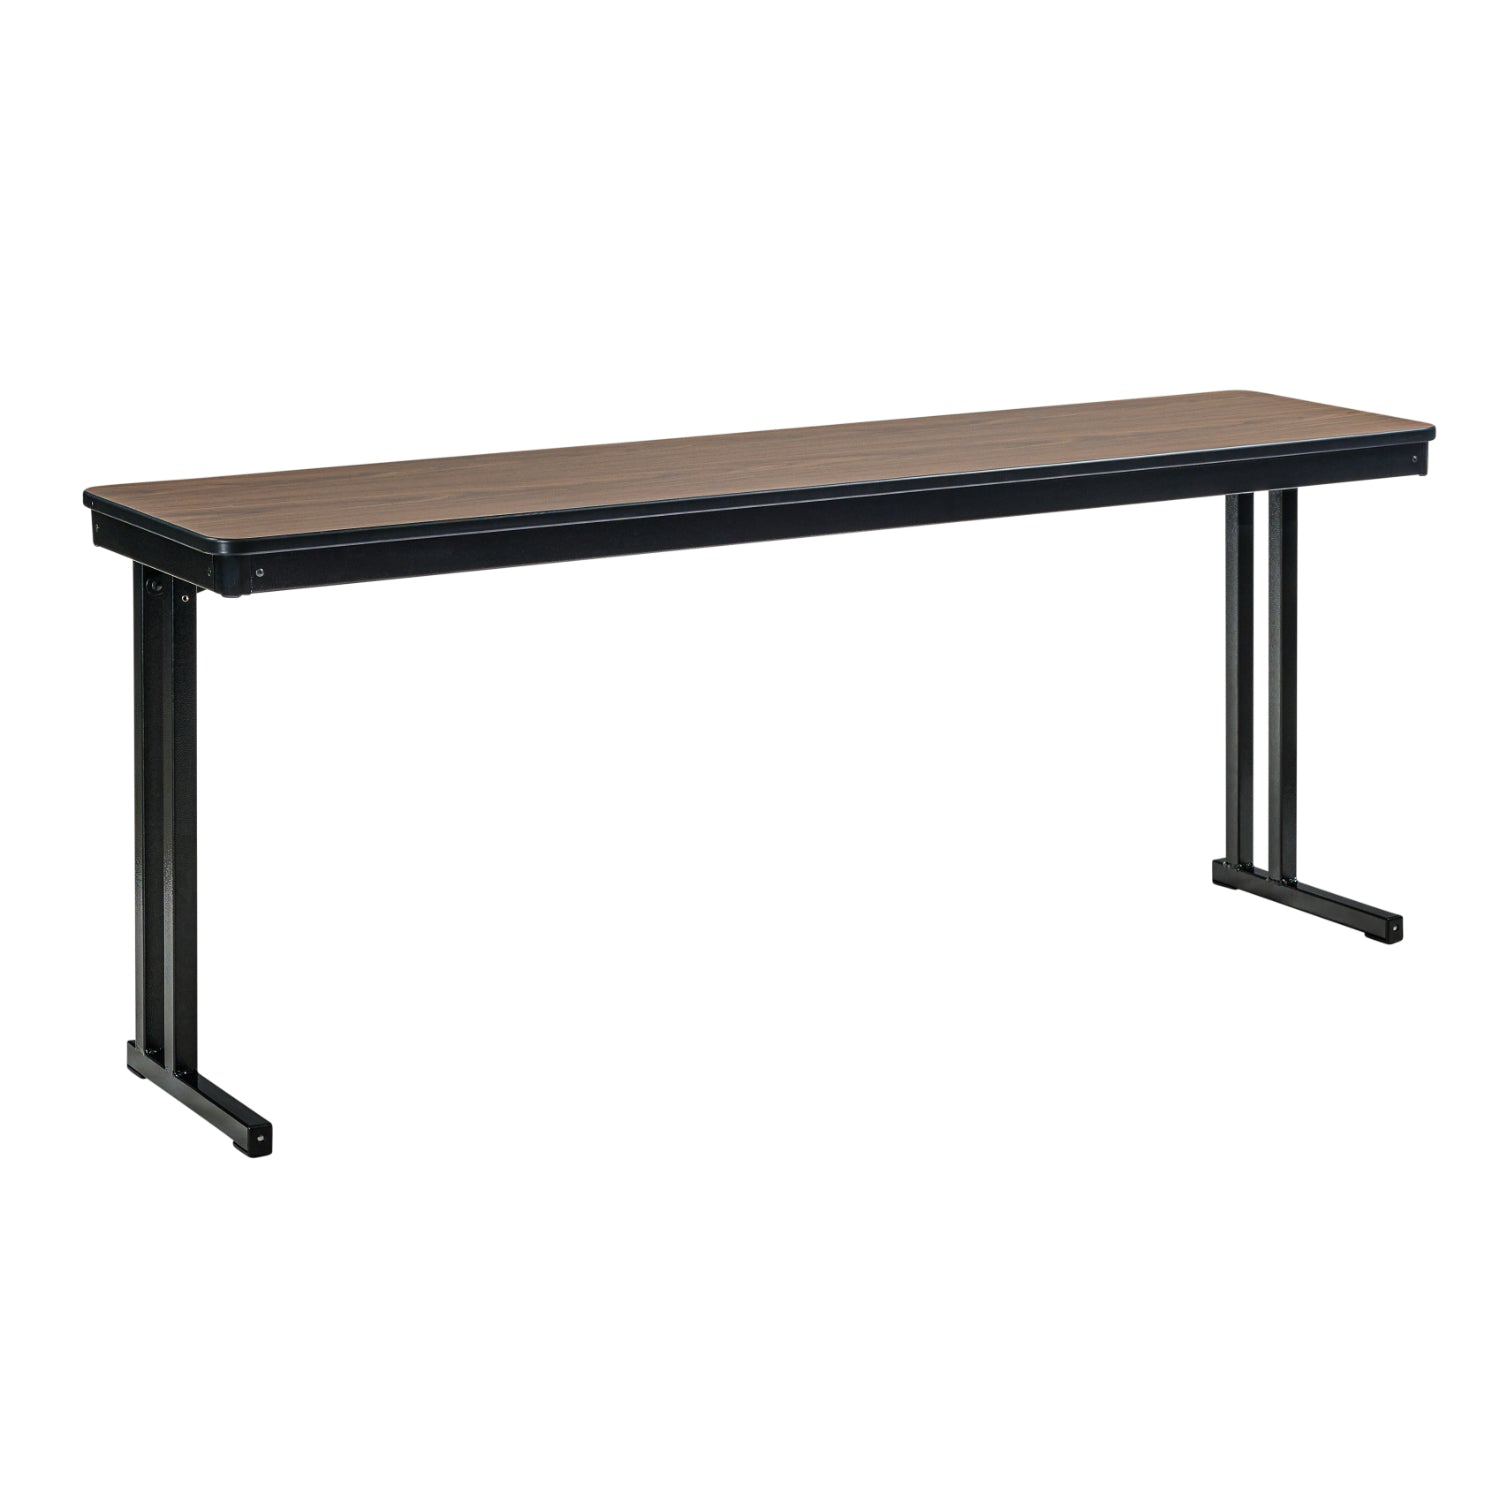 Max Seating Folding Training and Seminar Table with Cantilever Legs, 18" x 72", High Pressure Laminate Top with Particleboard Core/T-Mold Edge